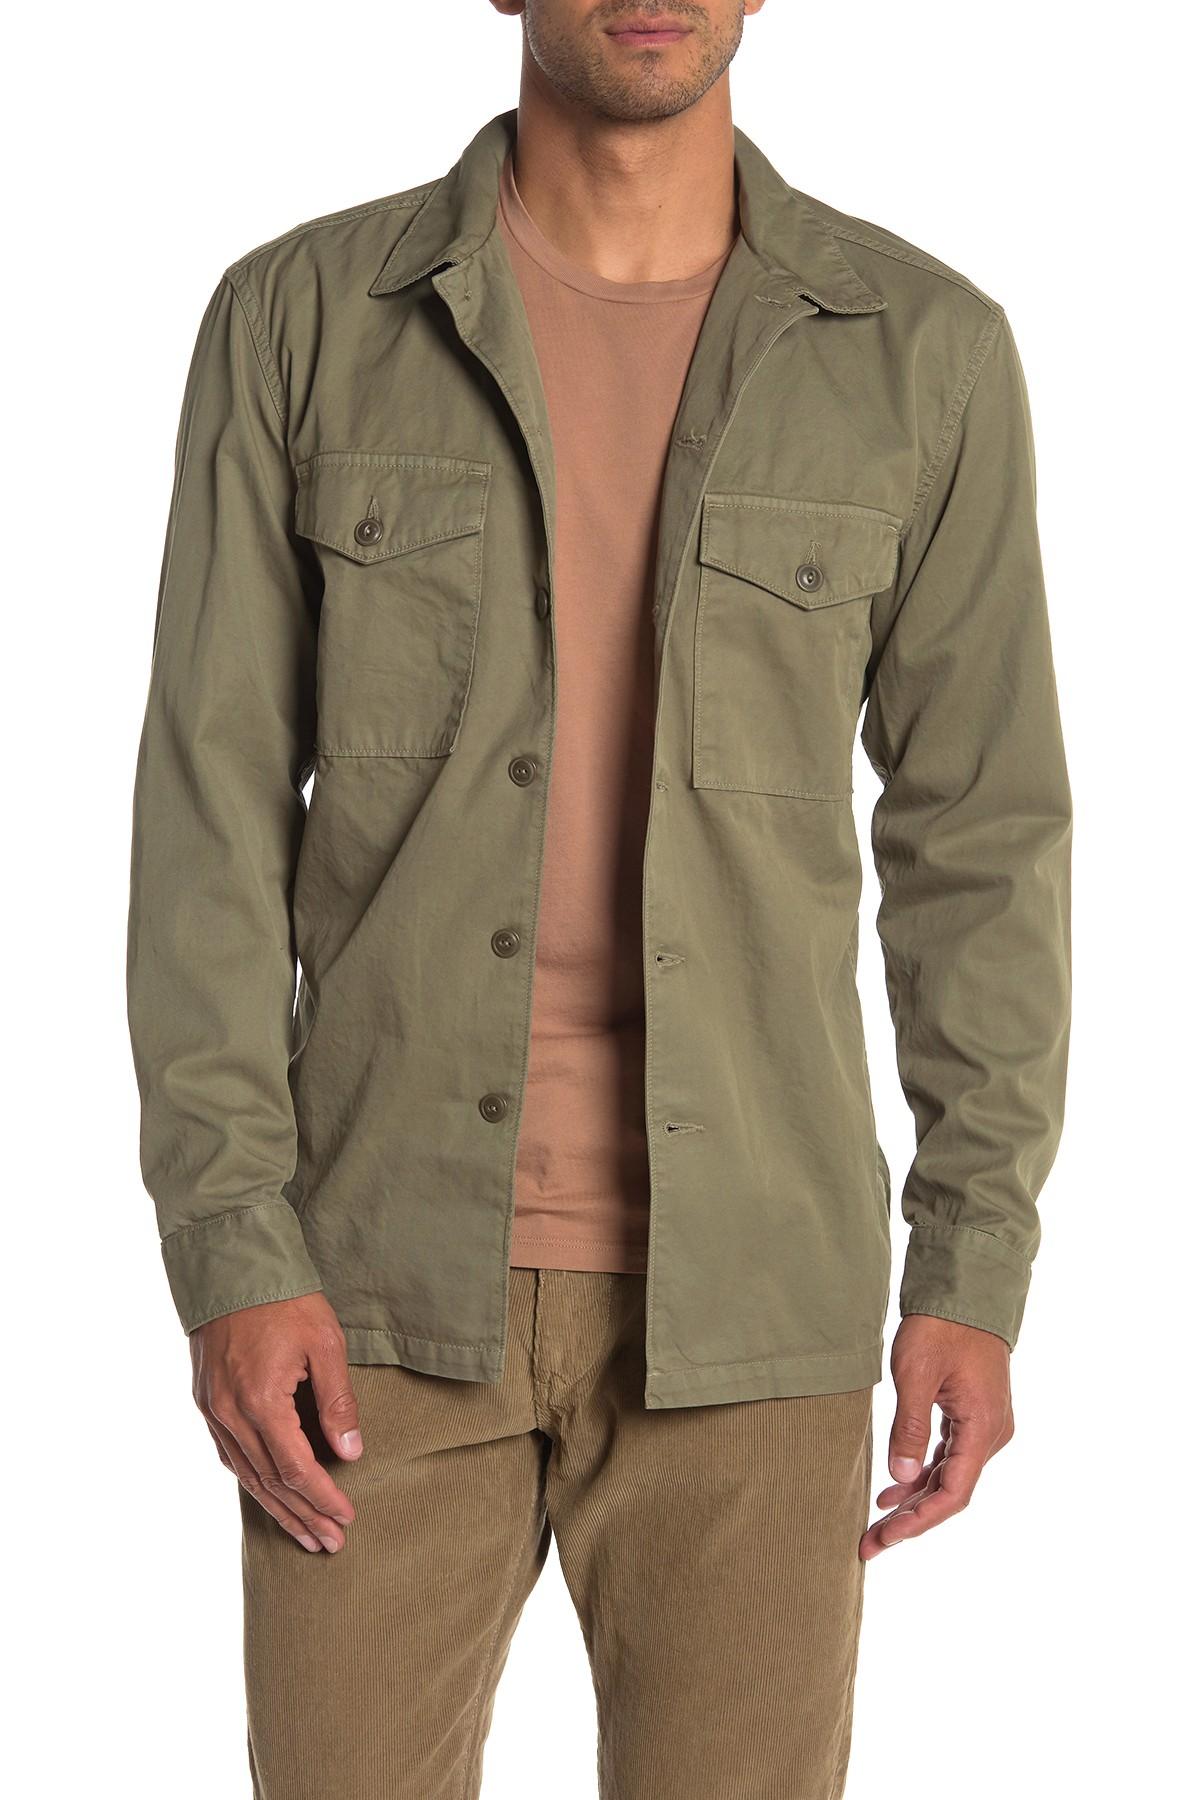 Save Khaki Cotton Twill Fatigue Overshirt in Green for Men - Lyst